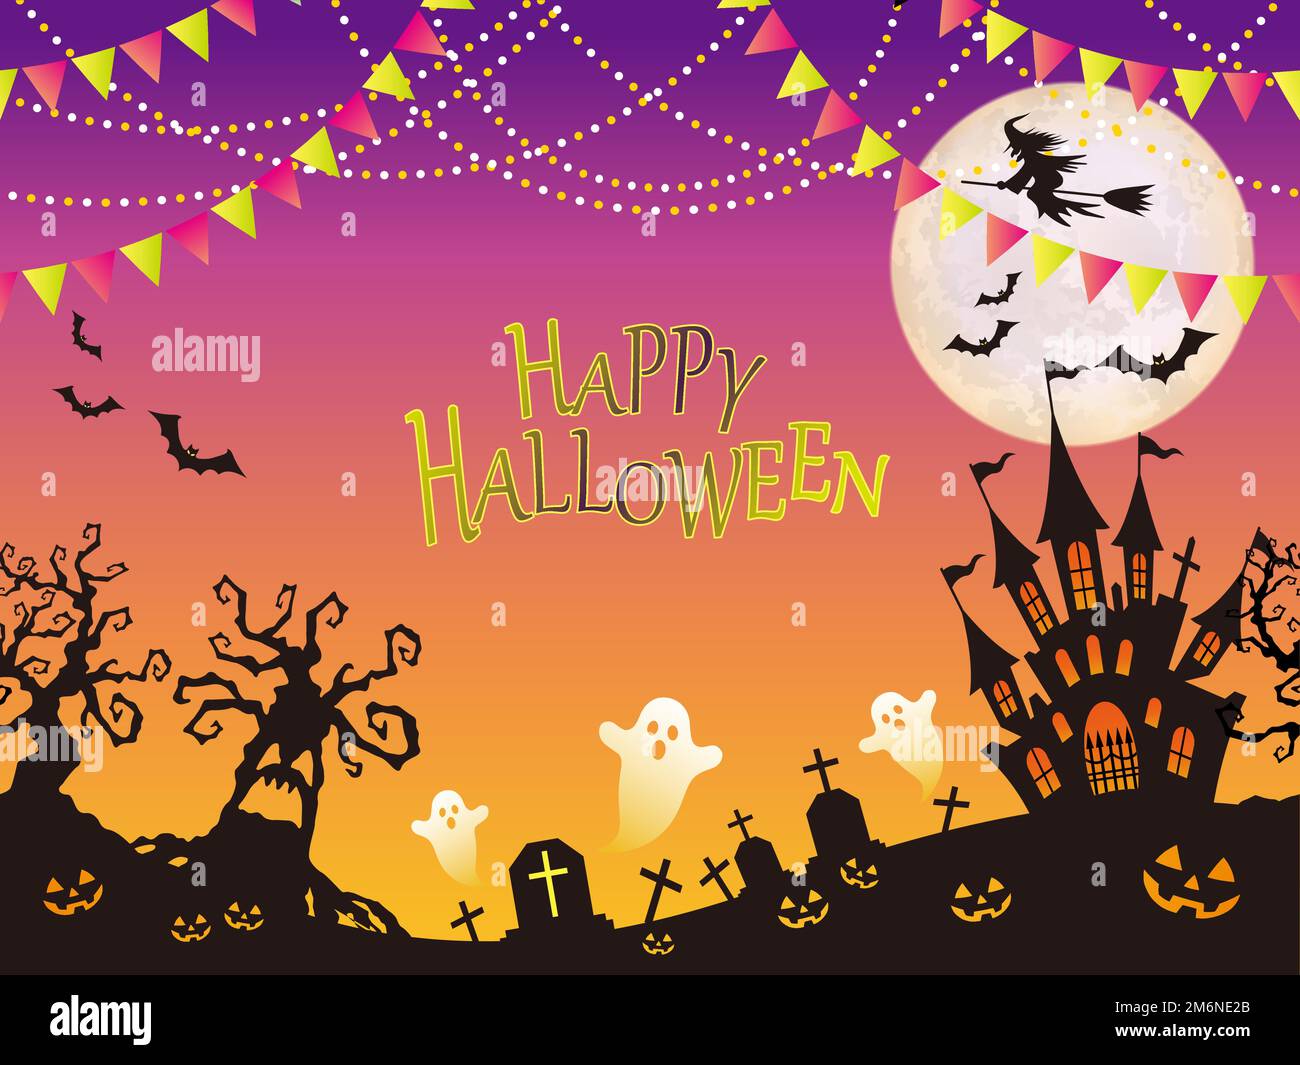 Seamless Happy Halloween Vector Background Illustration With A Haunted Mansion, Haunted Trees, Ghosts, And A Witch. Horizontally Repeatable. Stock Vector